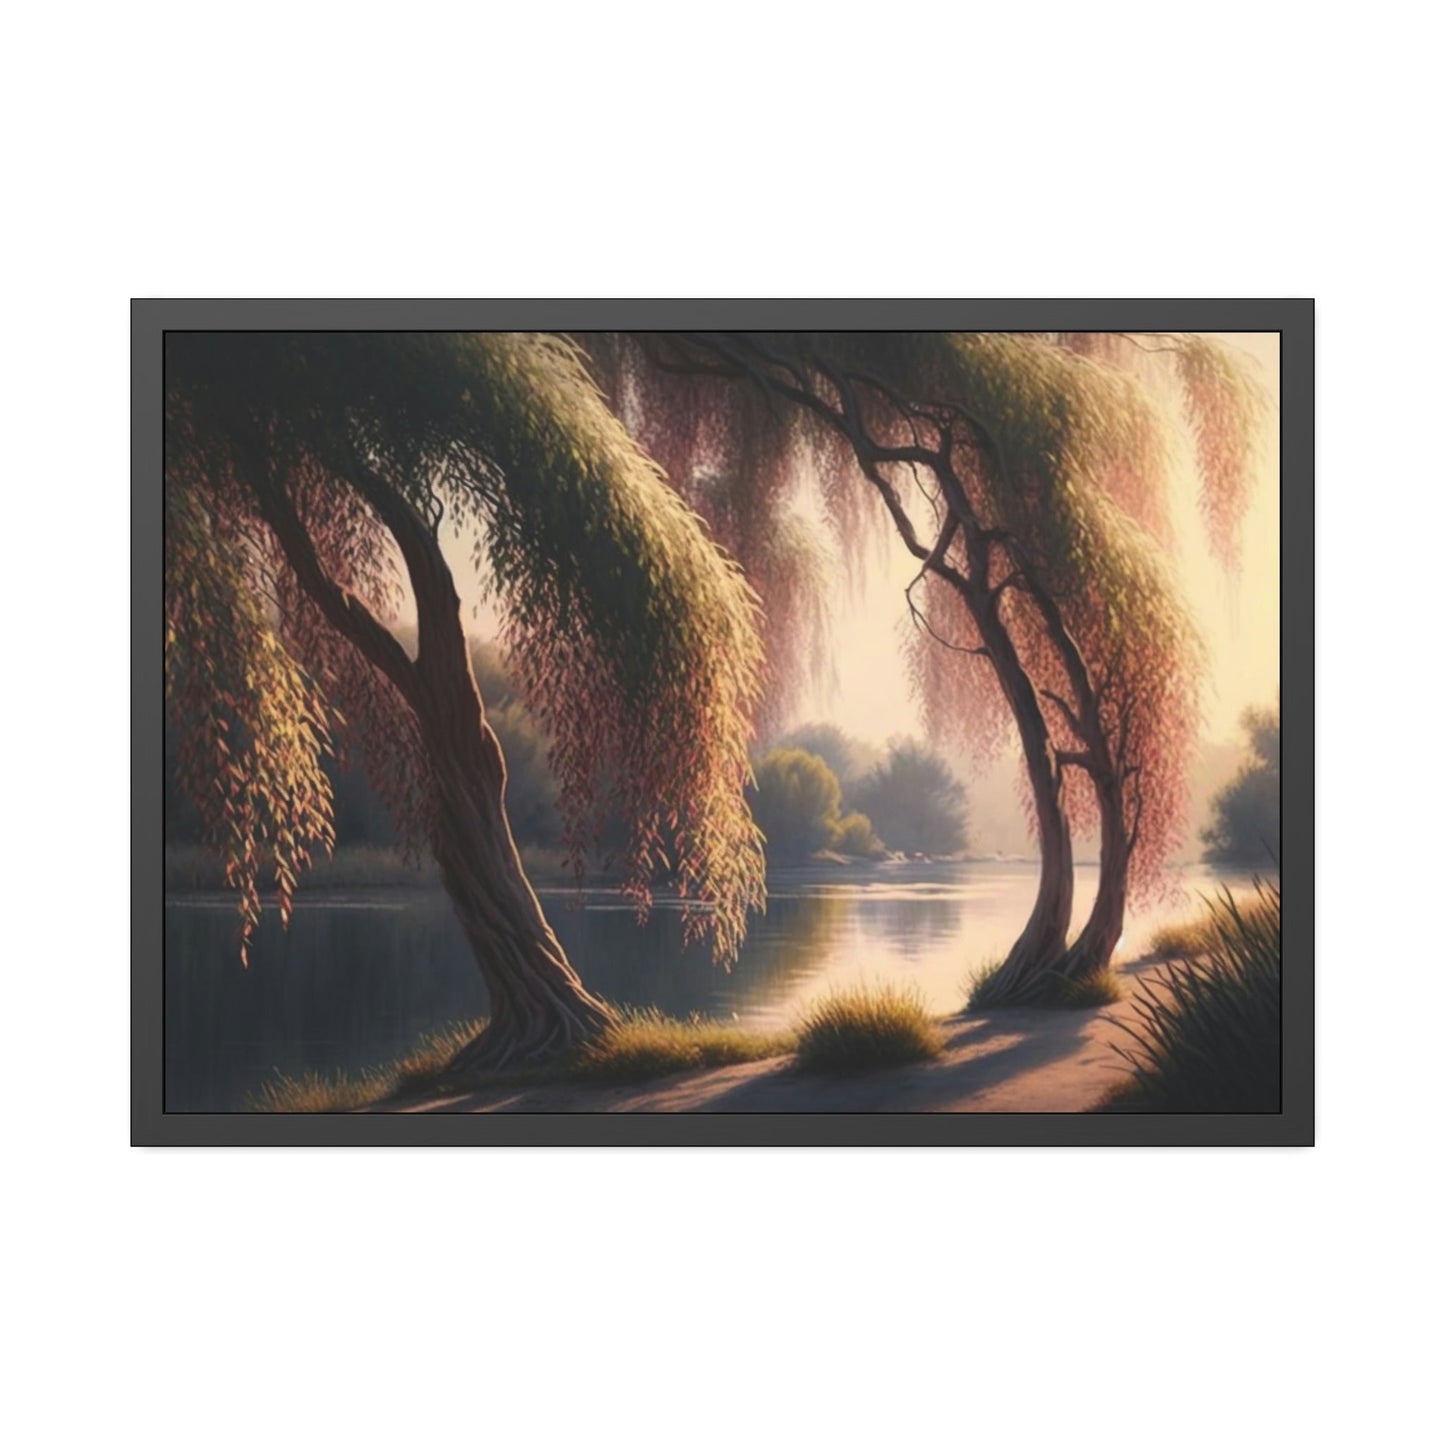 Enchanted Willows: A Dreamy Landscape